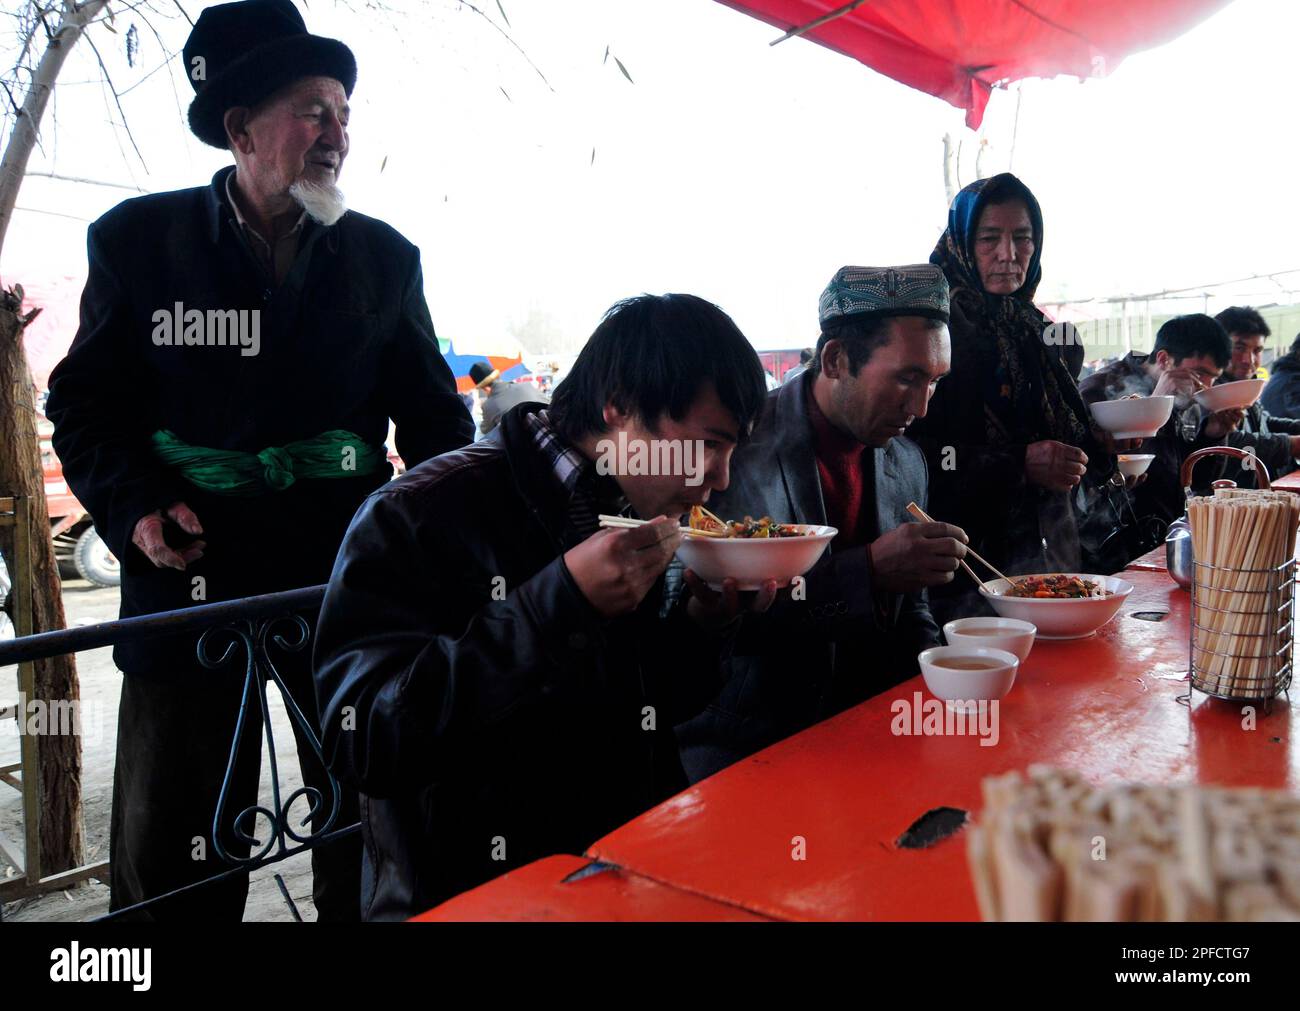 A small roadside restaurant serving Lagman noodles and rice with dumplings at a weekly livestock market in the outskirts of Kashgar, Xinjiang, China. Stock Photo